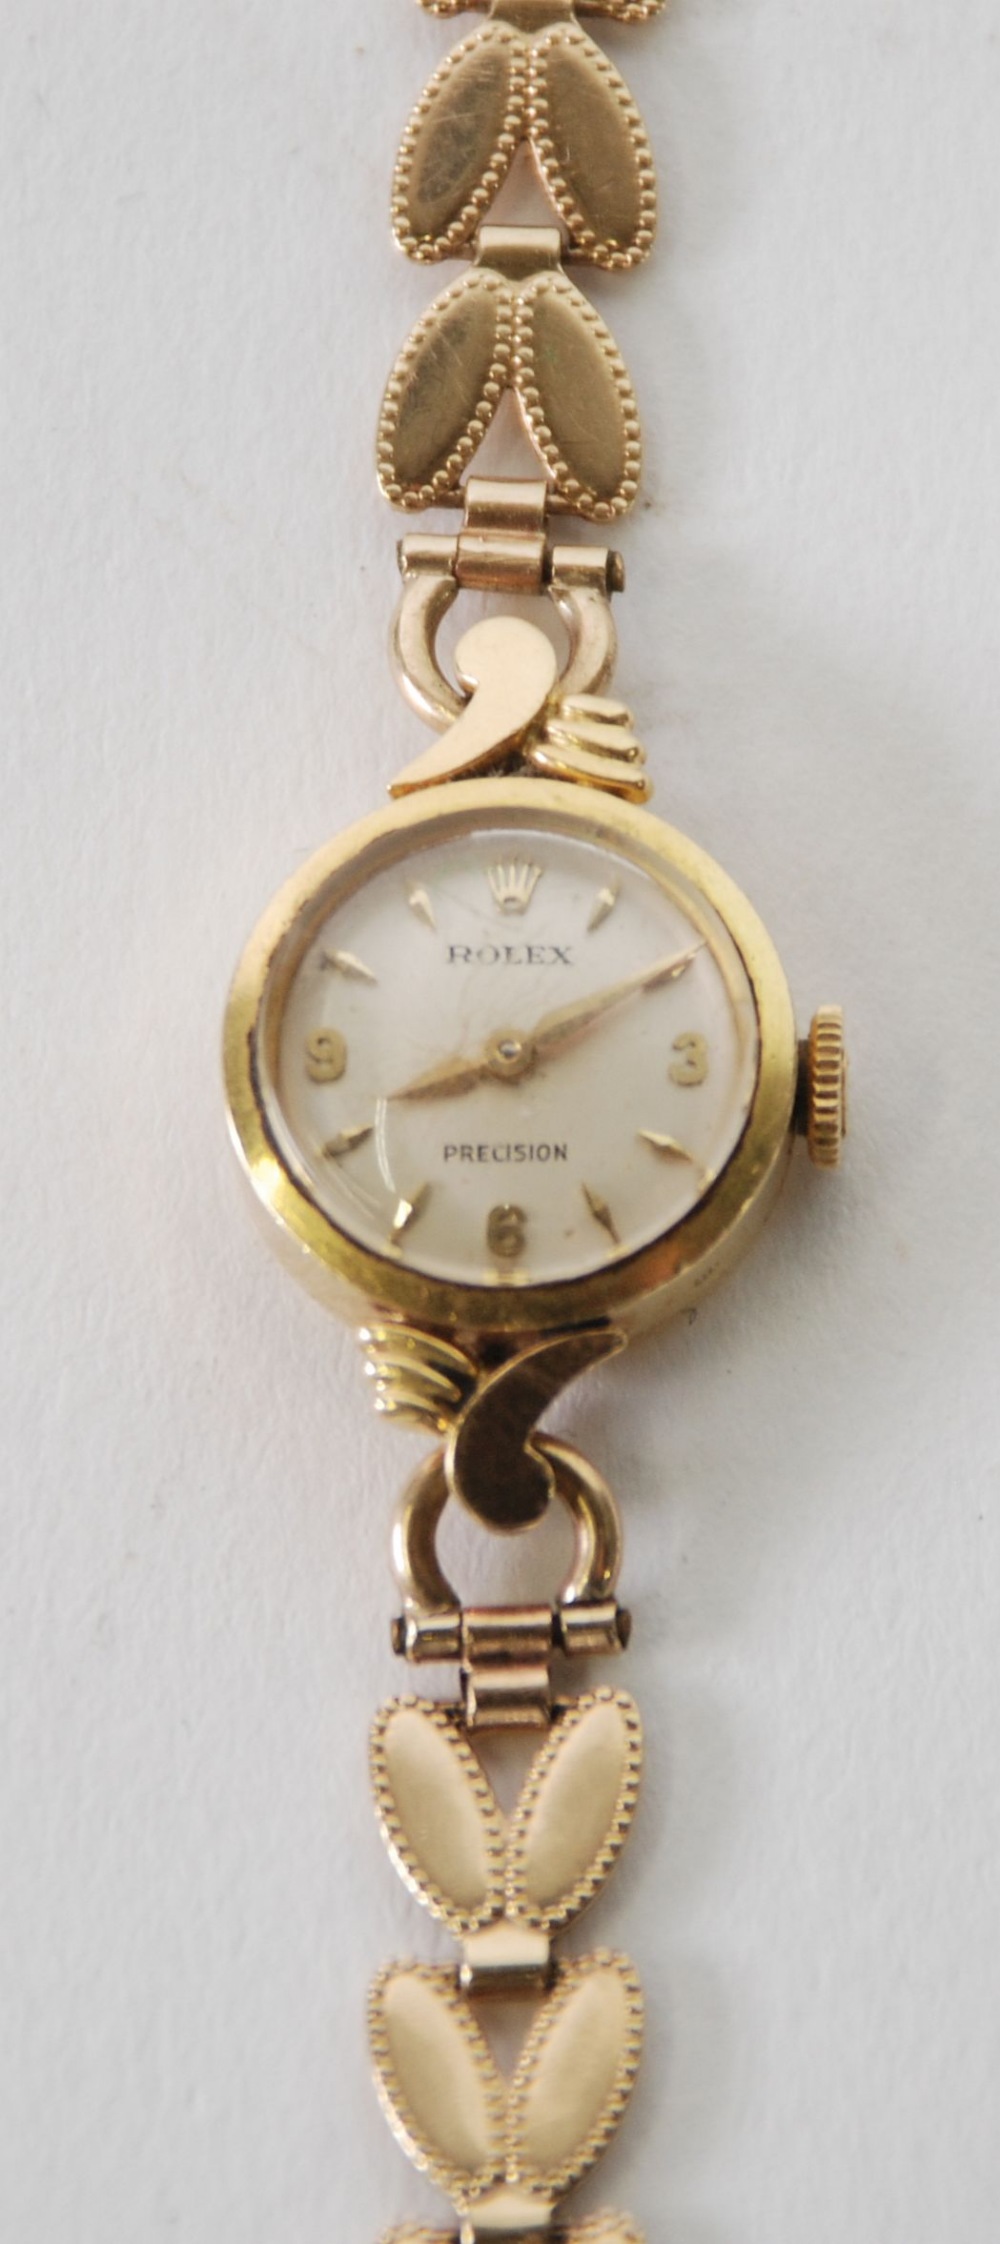 LADY'S ROLEX 'PRECISION' 18ct GOLD WRIST WATCH, with small circular silvered dial, mechanical